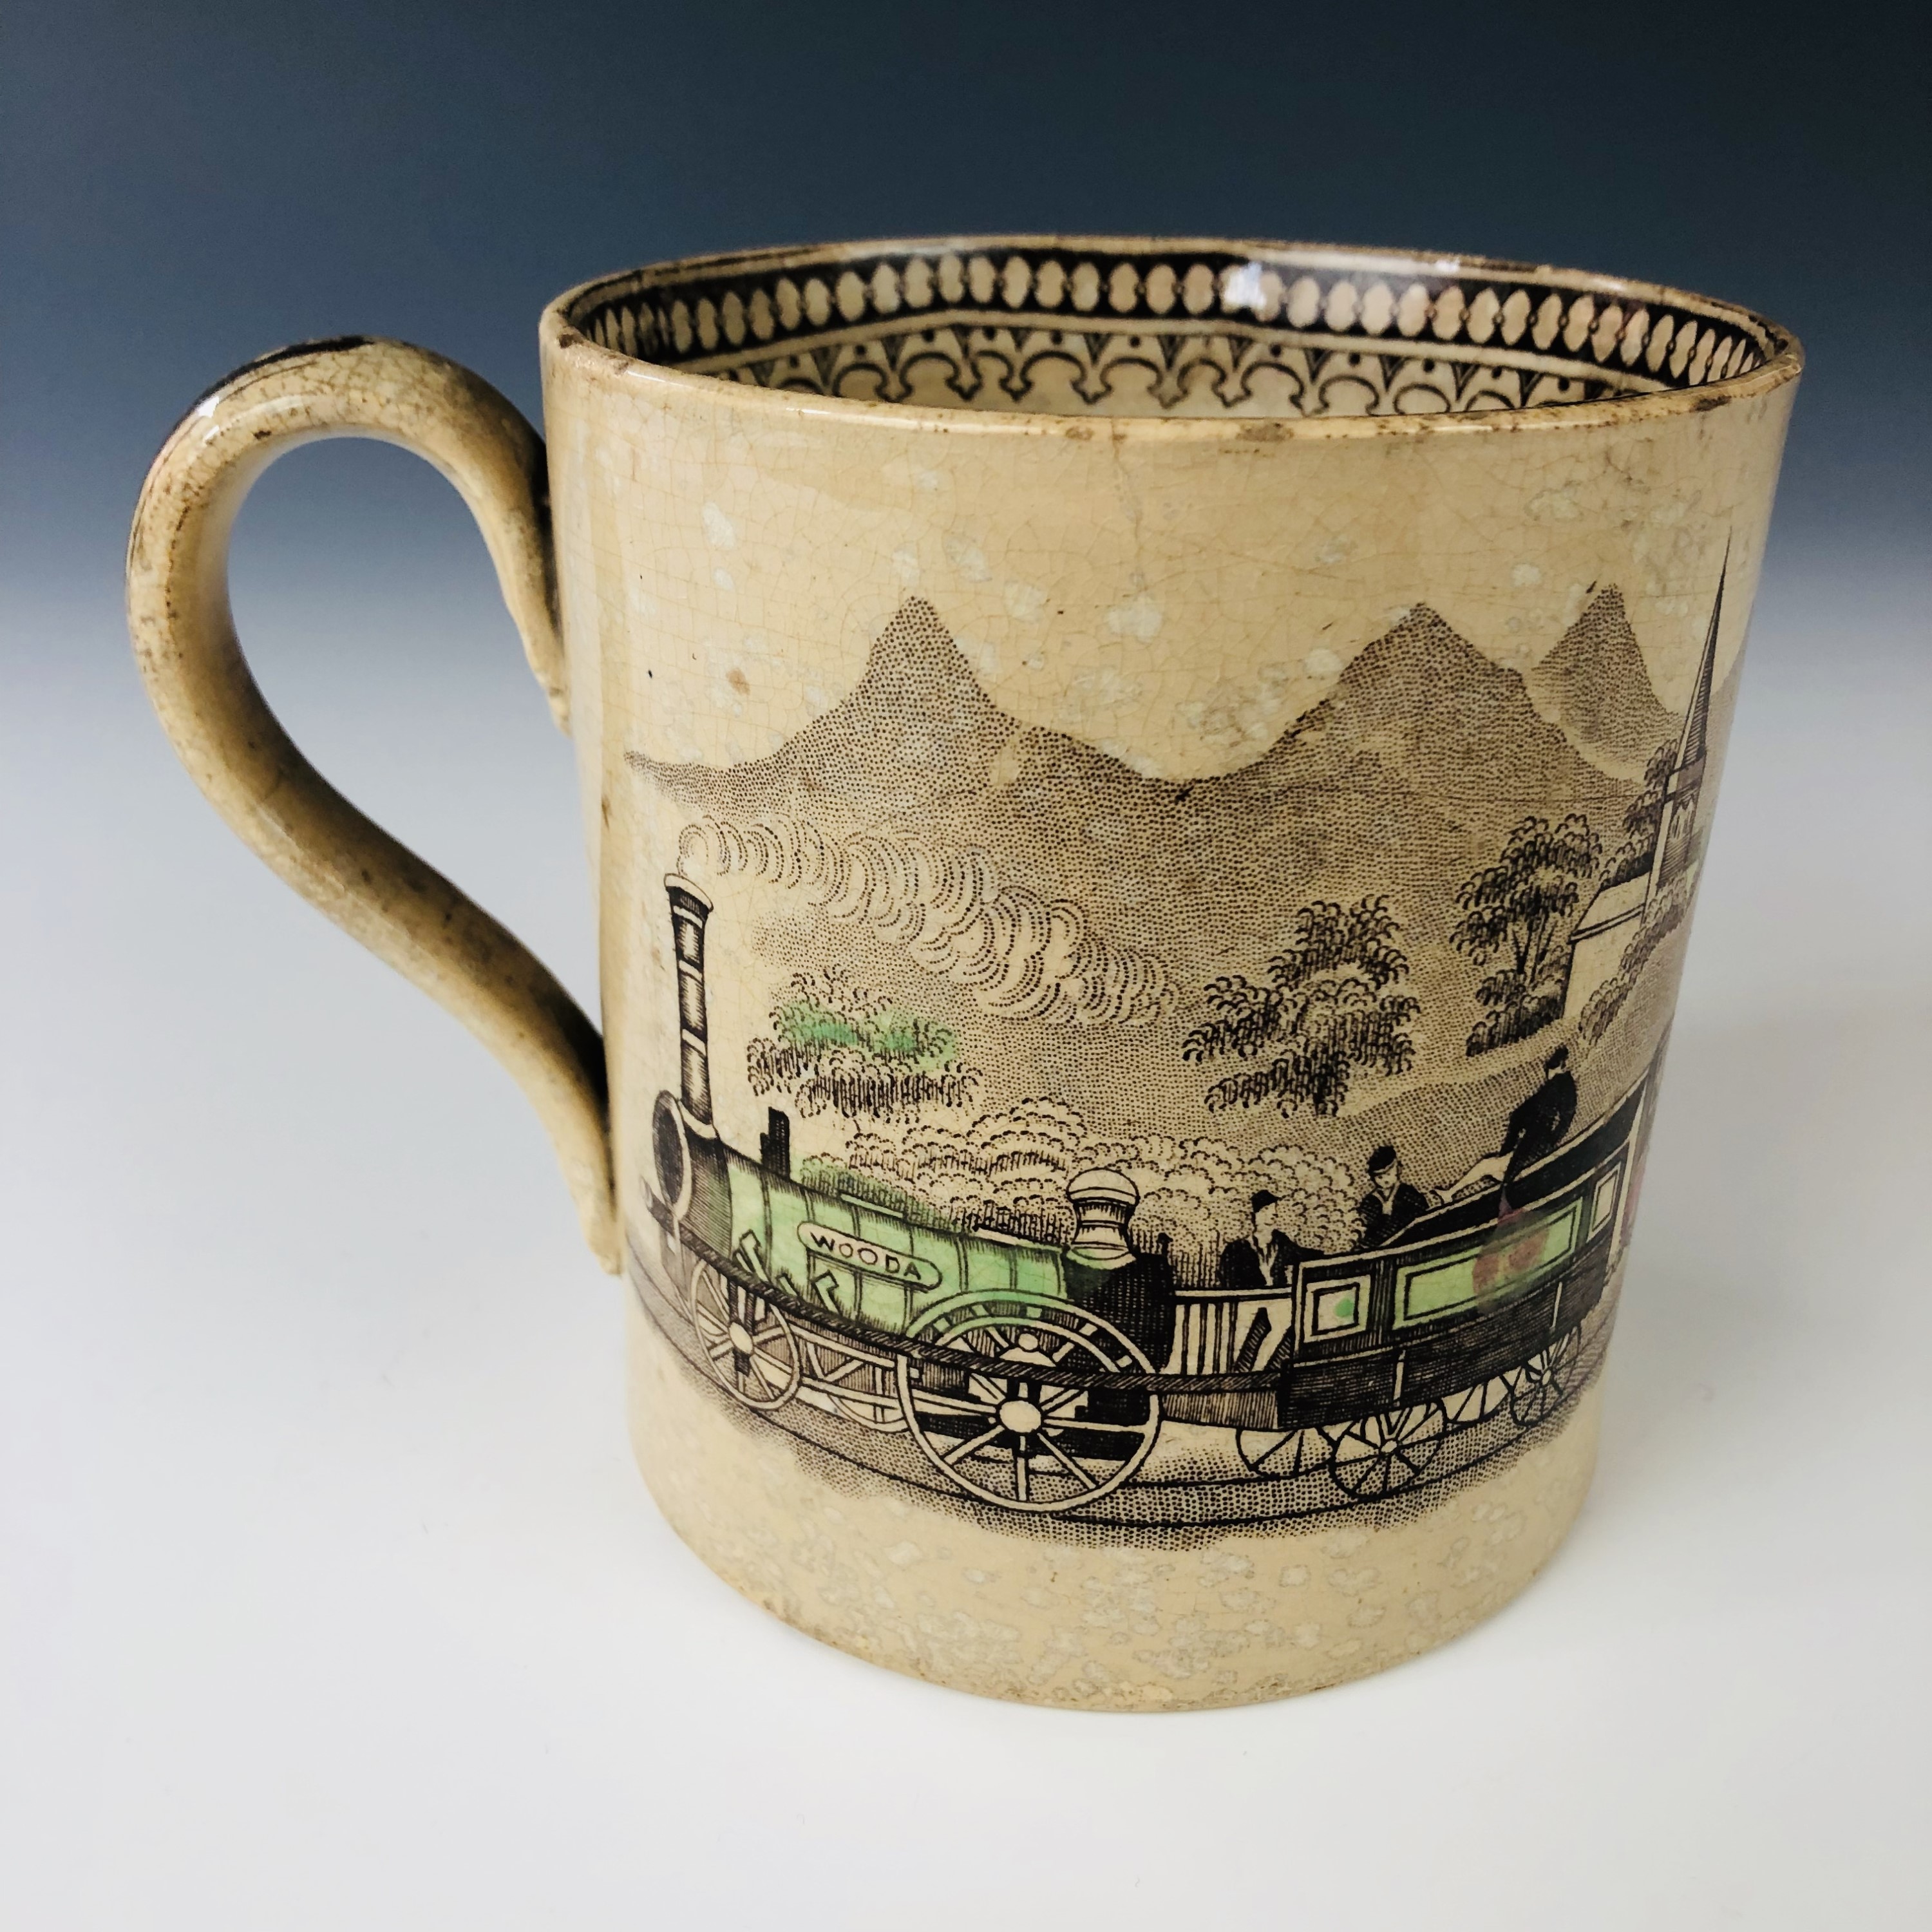 A mid 19th century Staffordshire pottery railway pattern mug, decorated in the round with a - Image 2 of 3